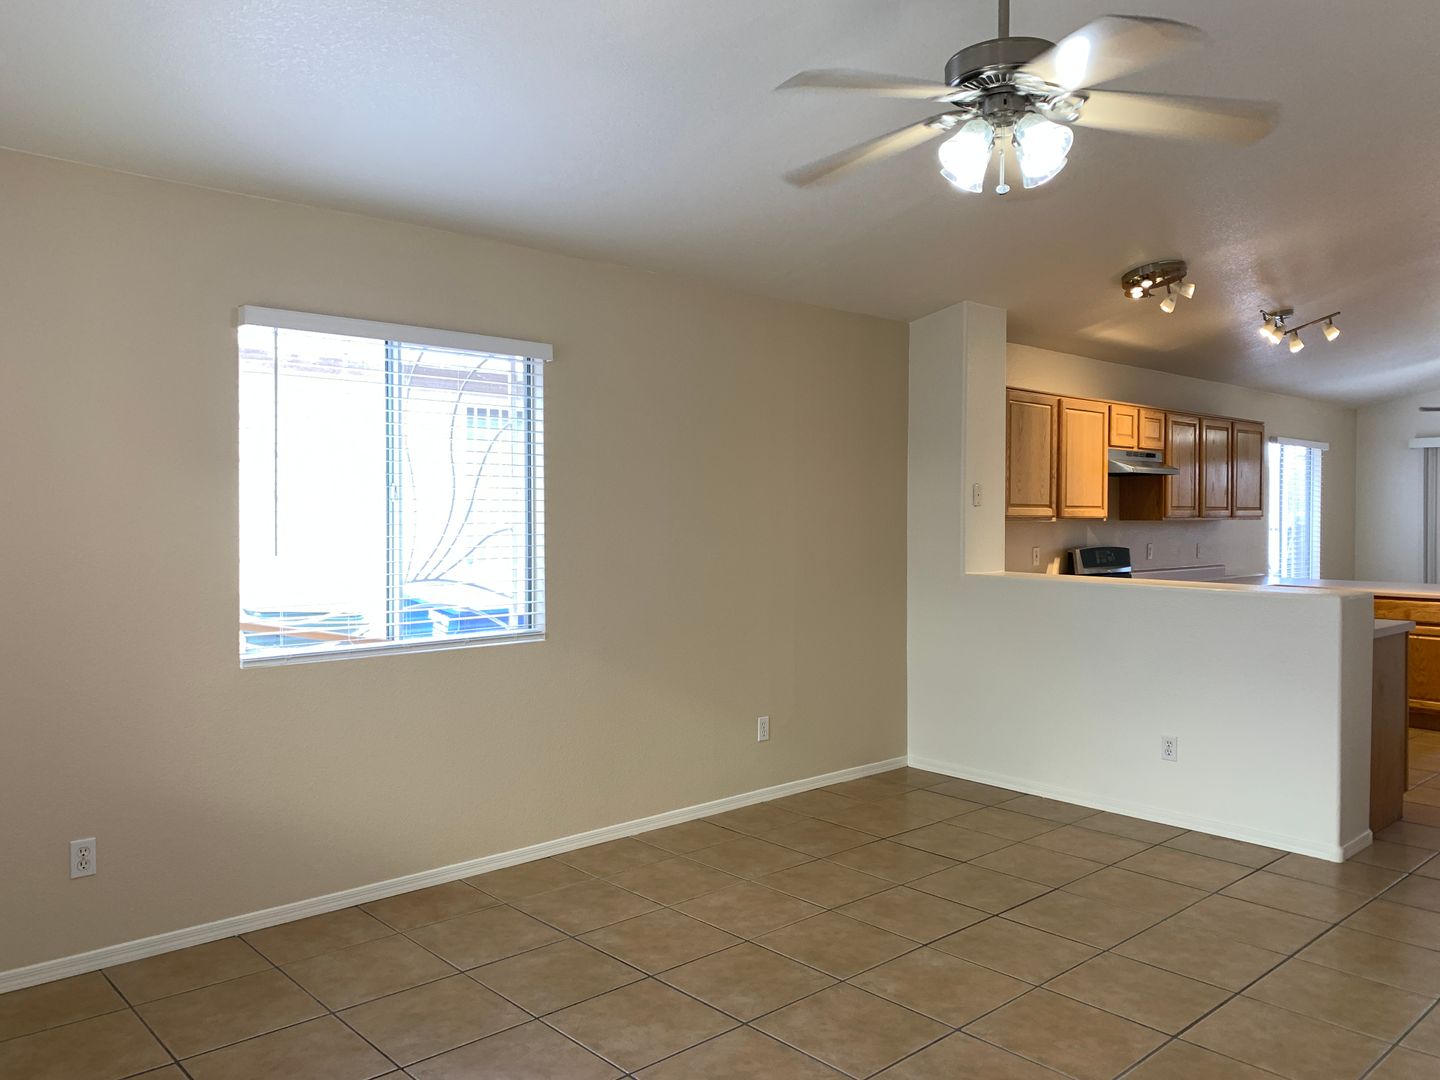 Welcome to 2439 S Saint Pablo Dr., a spacious 3 bedroom, 2 bathroom home located in Tucson, AZ